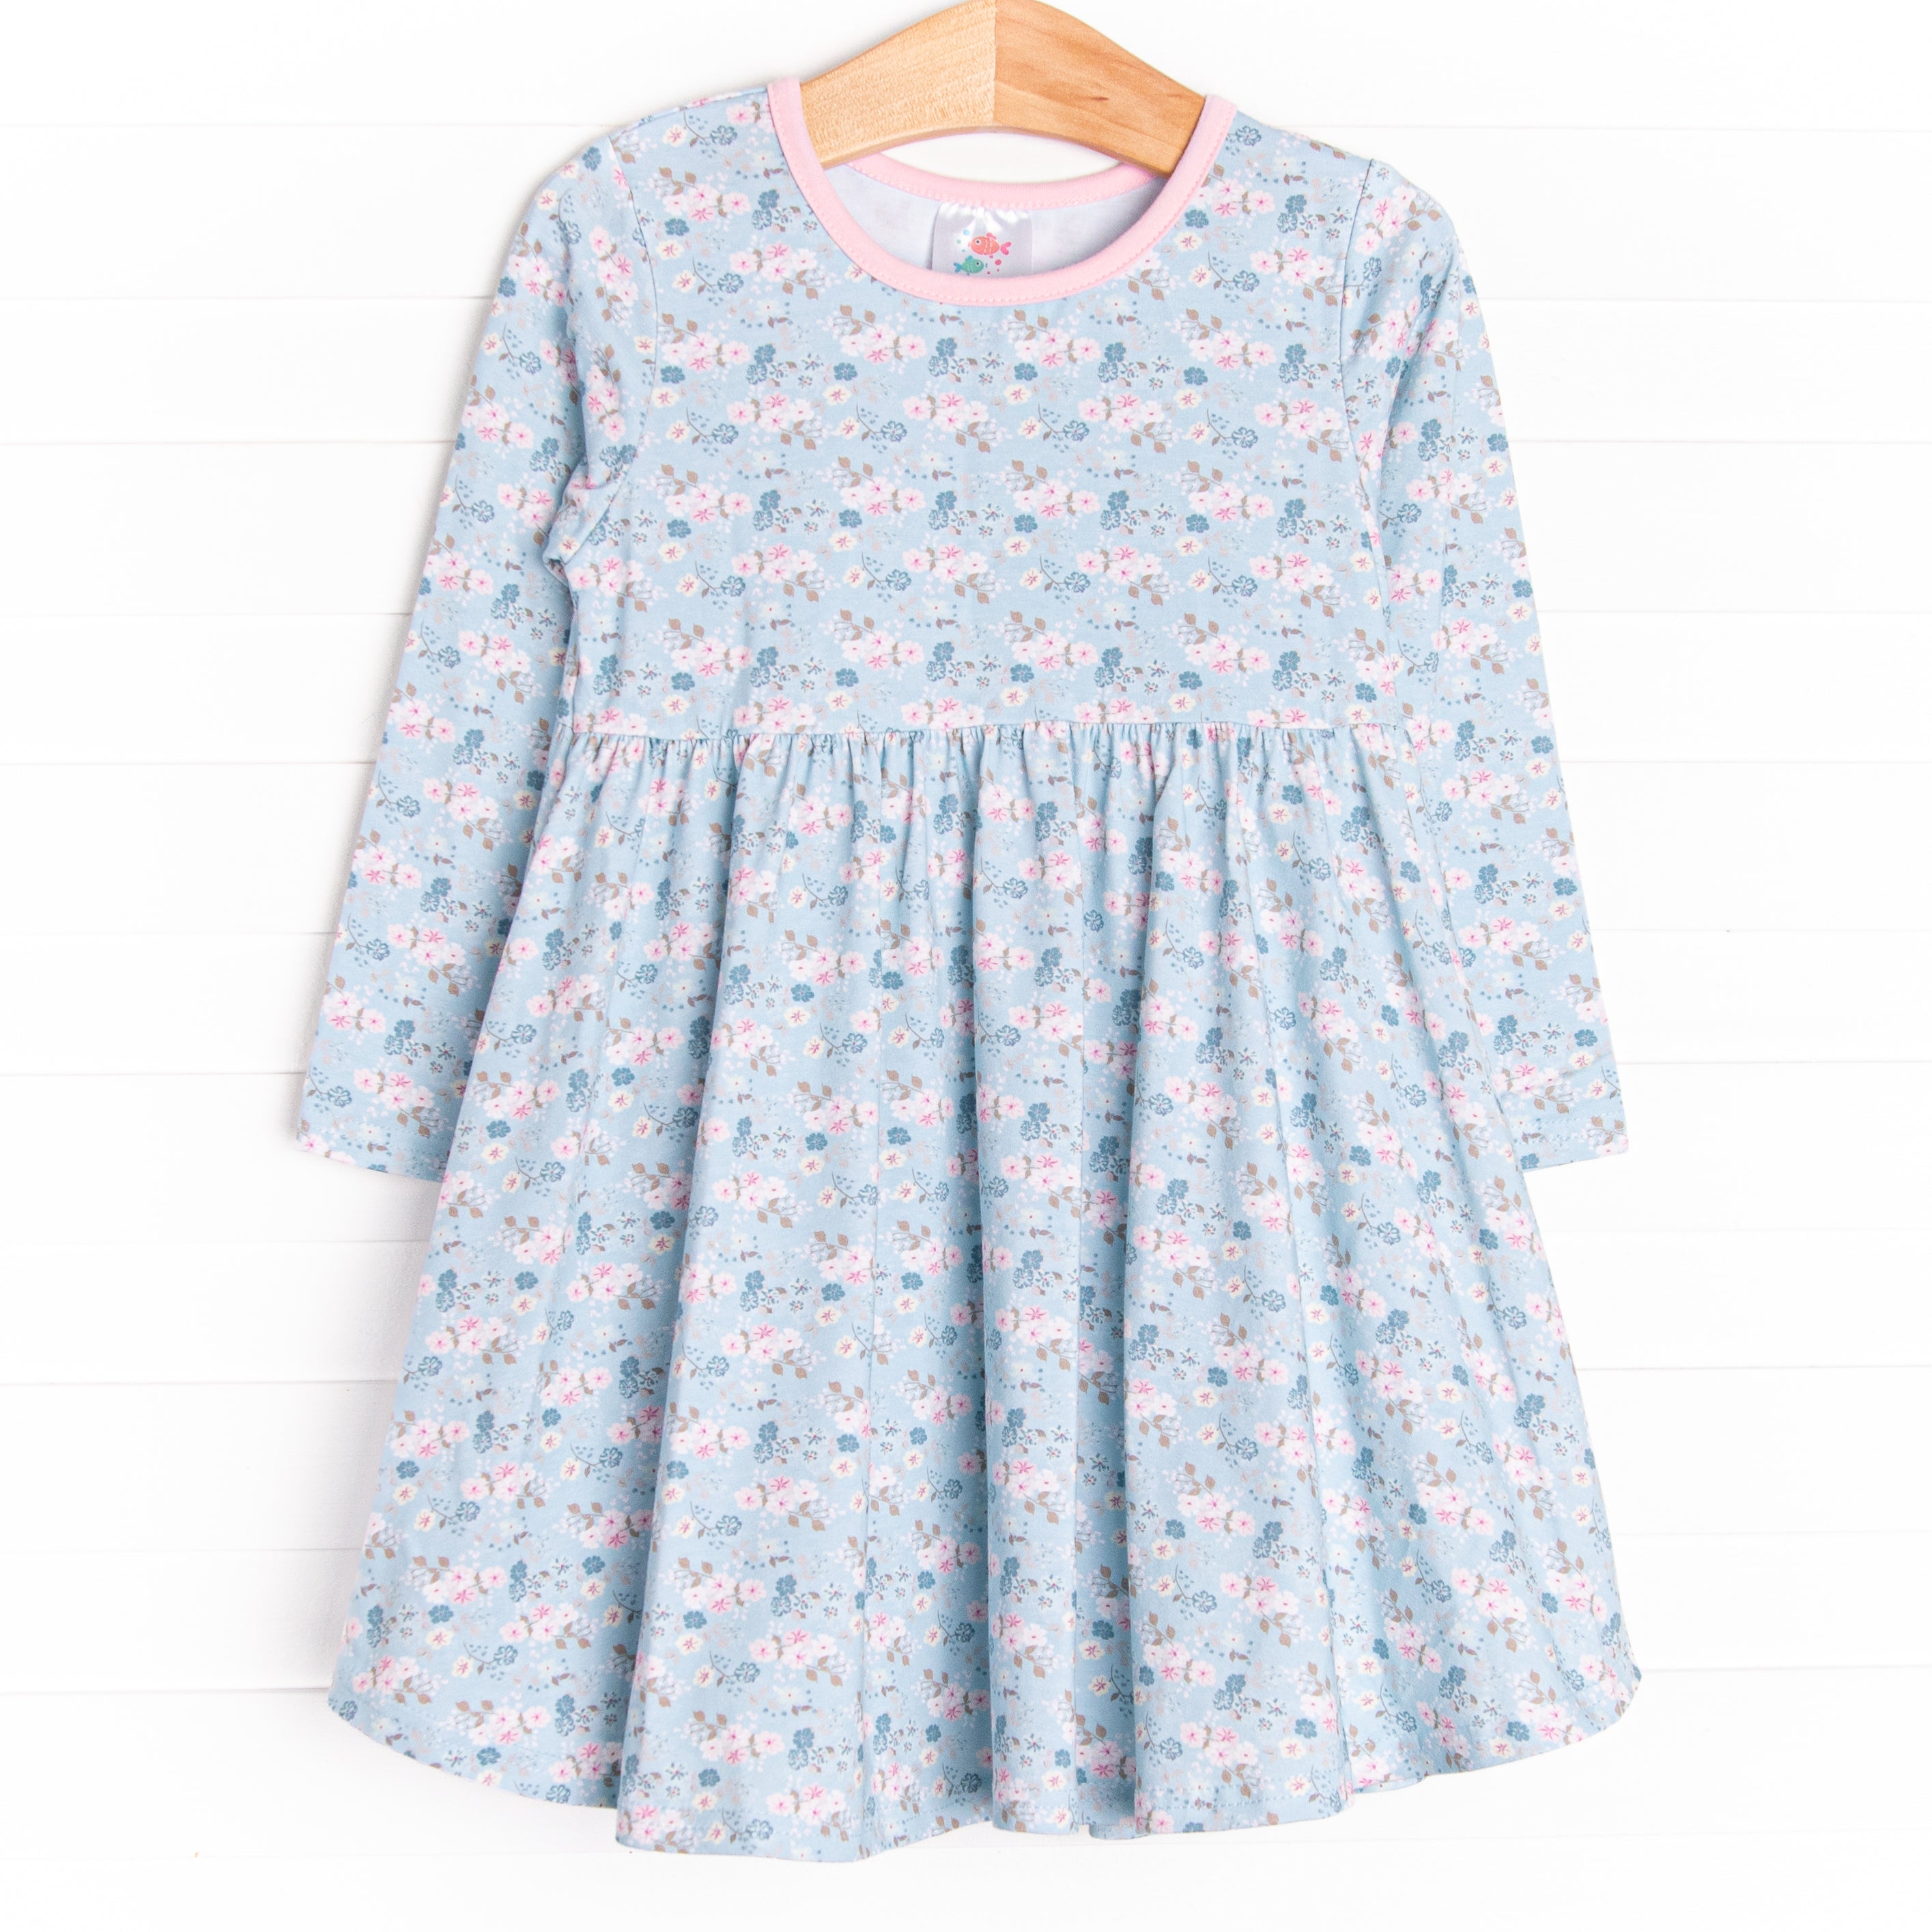 Image of Faye Dress, Blue and Pink Floral